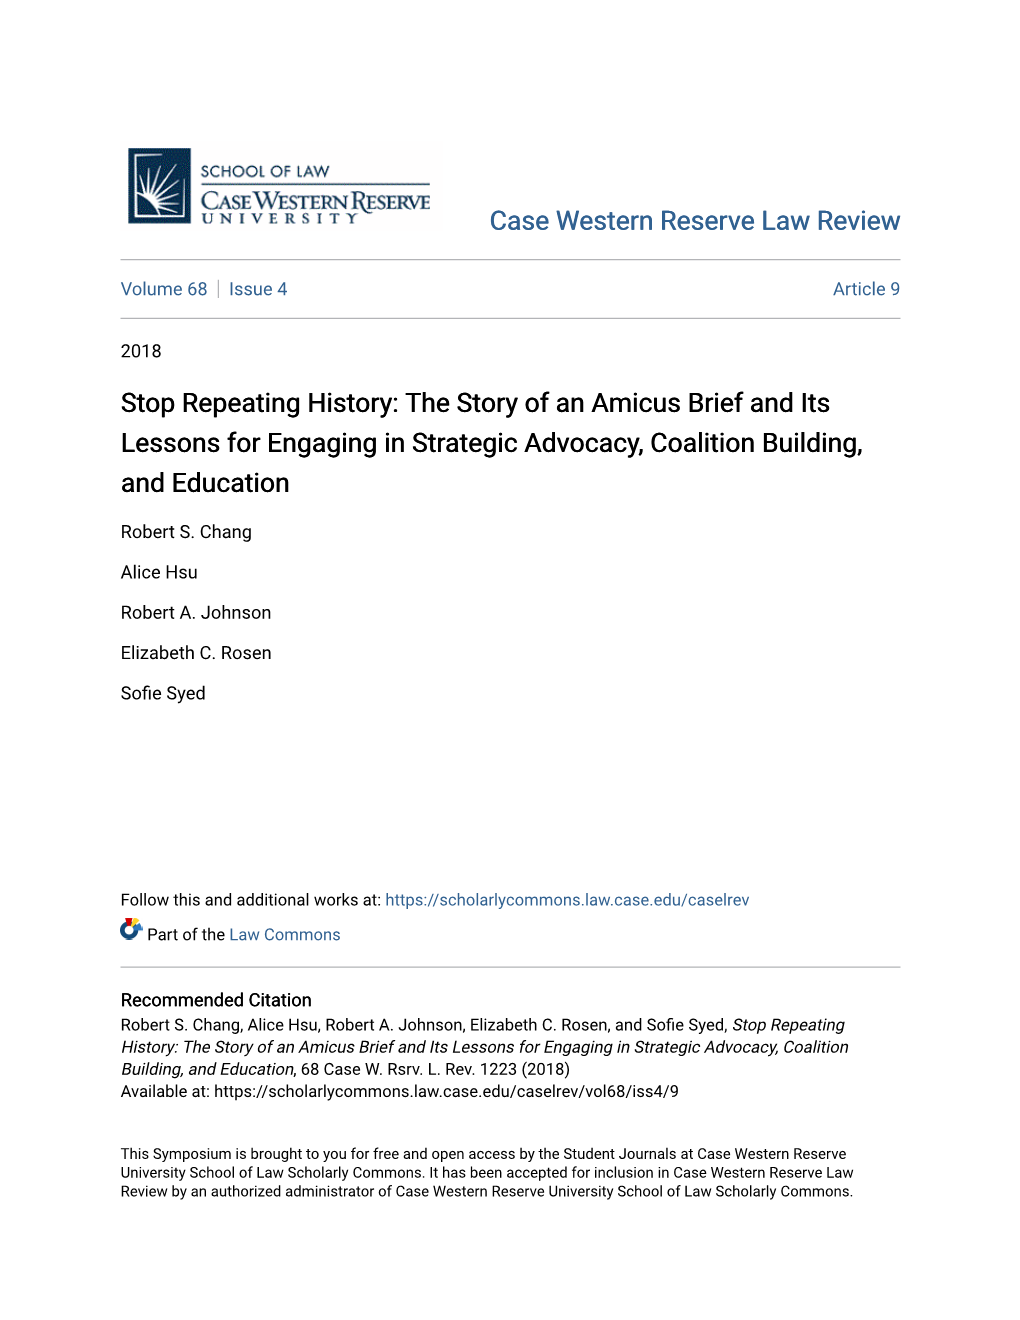 Stop Repeating History: the Story of an Amicus Brief and Its Lessons for Engaging in Strategic Advocacy, Coalition Building, and Education